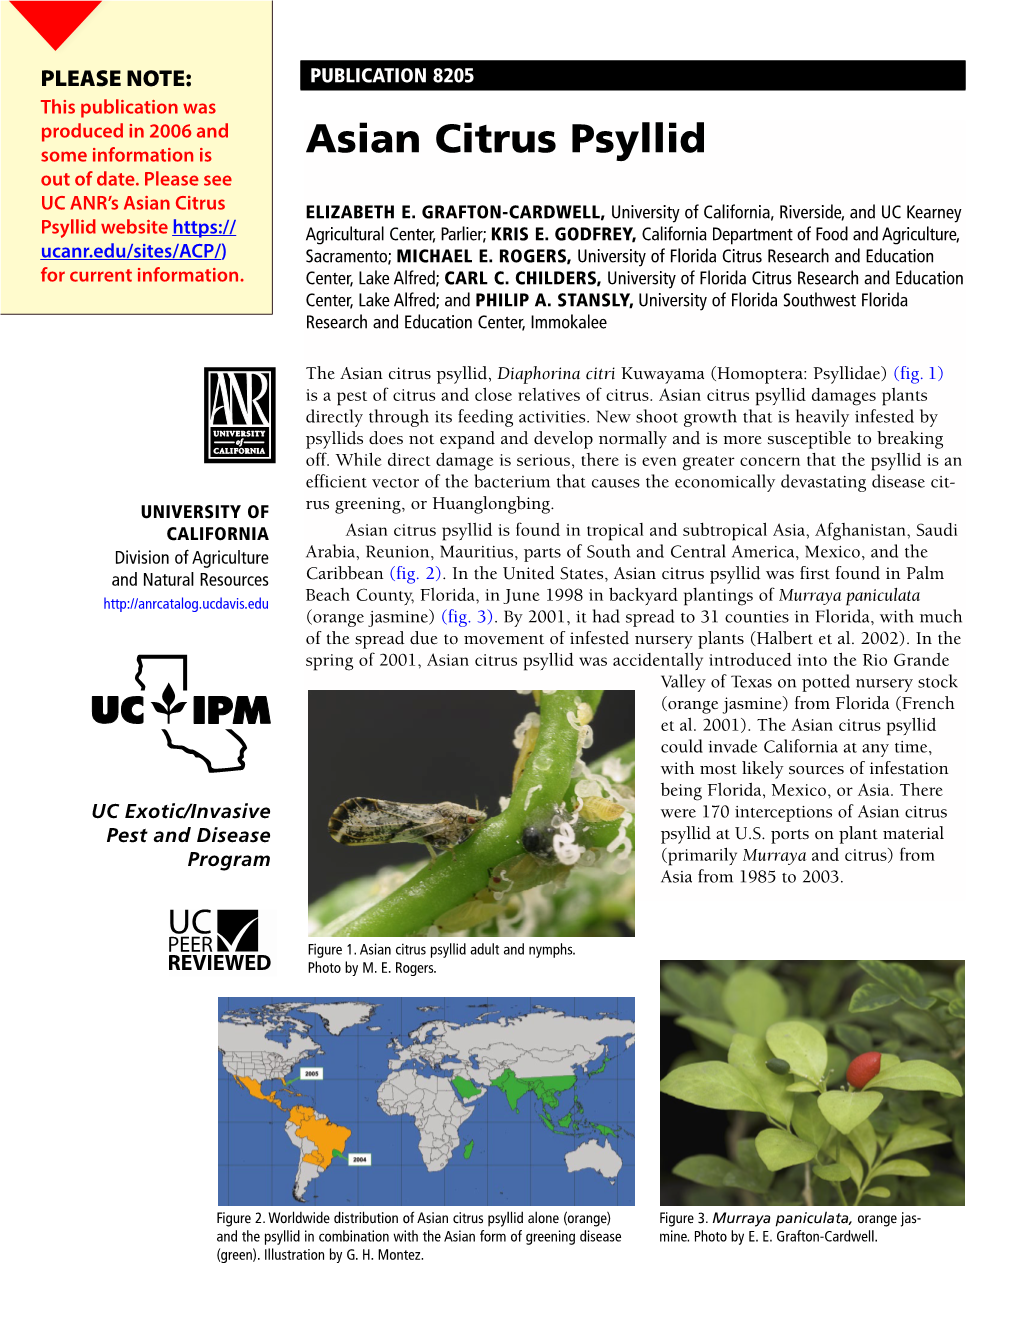 Asian Citrus Psyllid out of Date